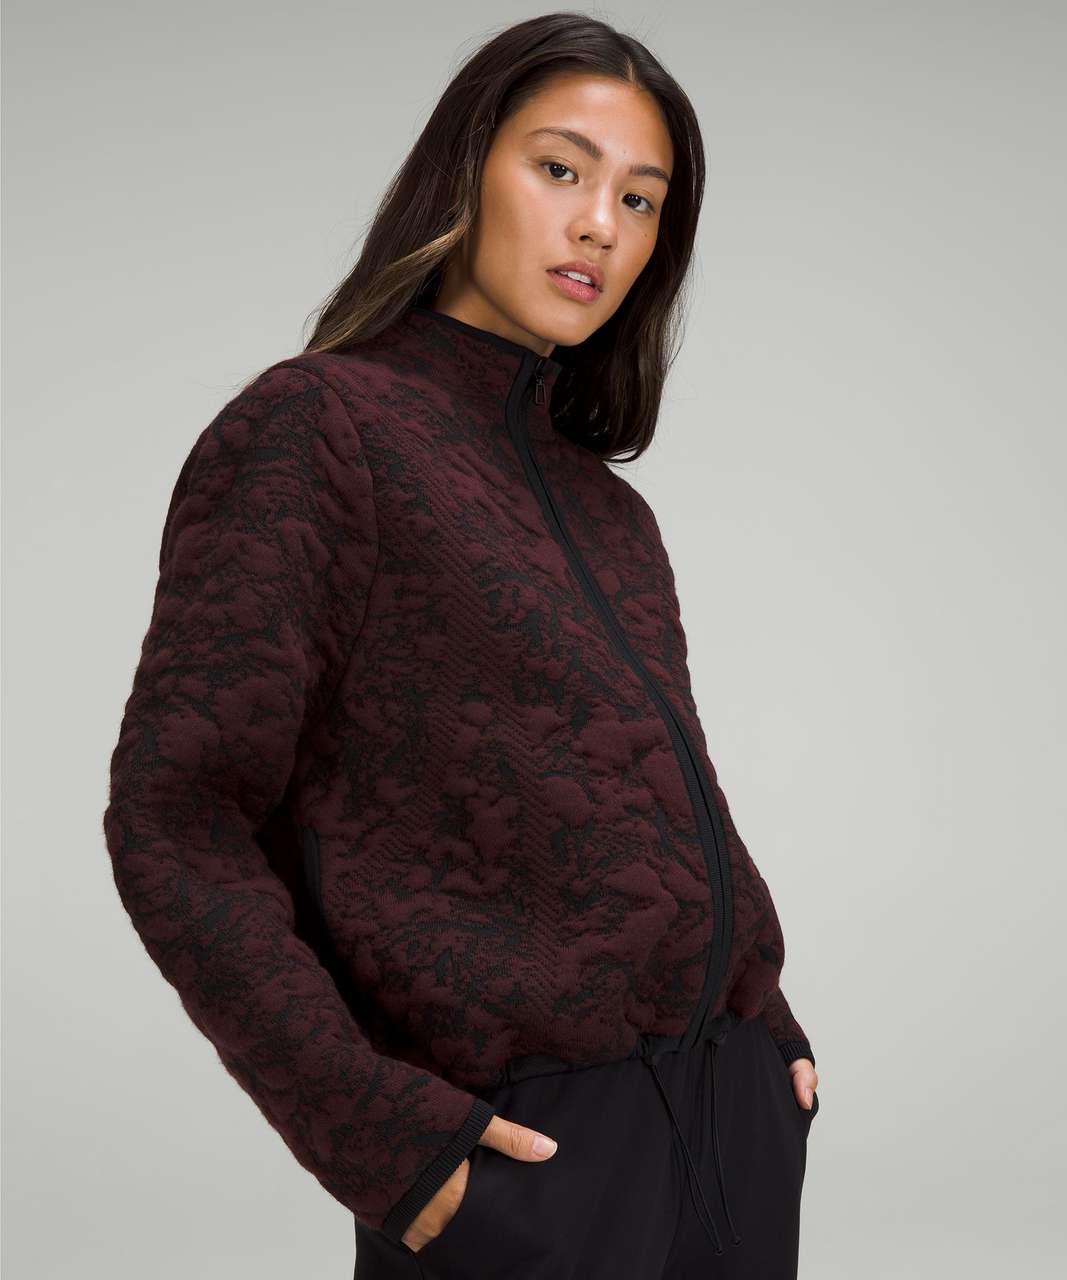 Lululemon NEW Jacquard Multi-Texture Sweater Jacket in Red Merlot / Black  NWT 6 - $100 New With Tags - From BLuxe